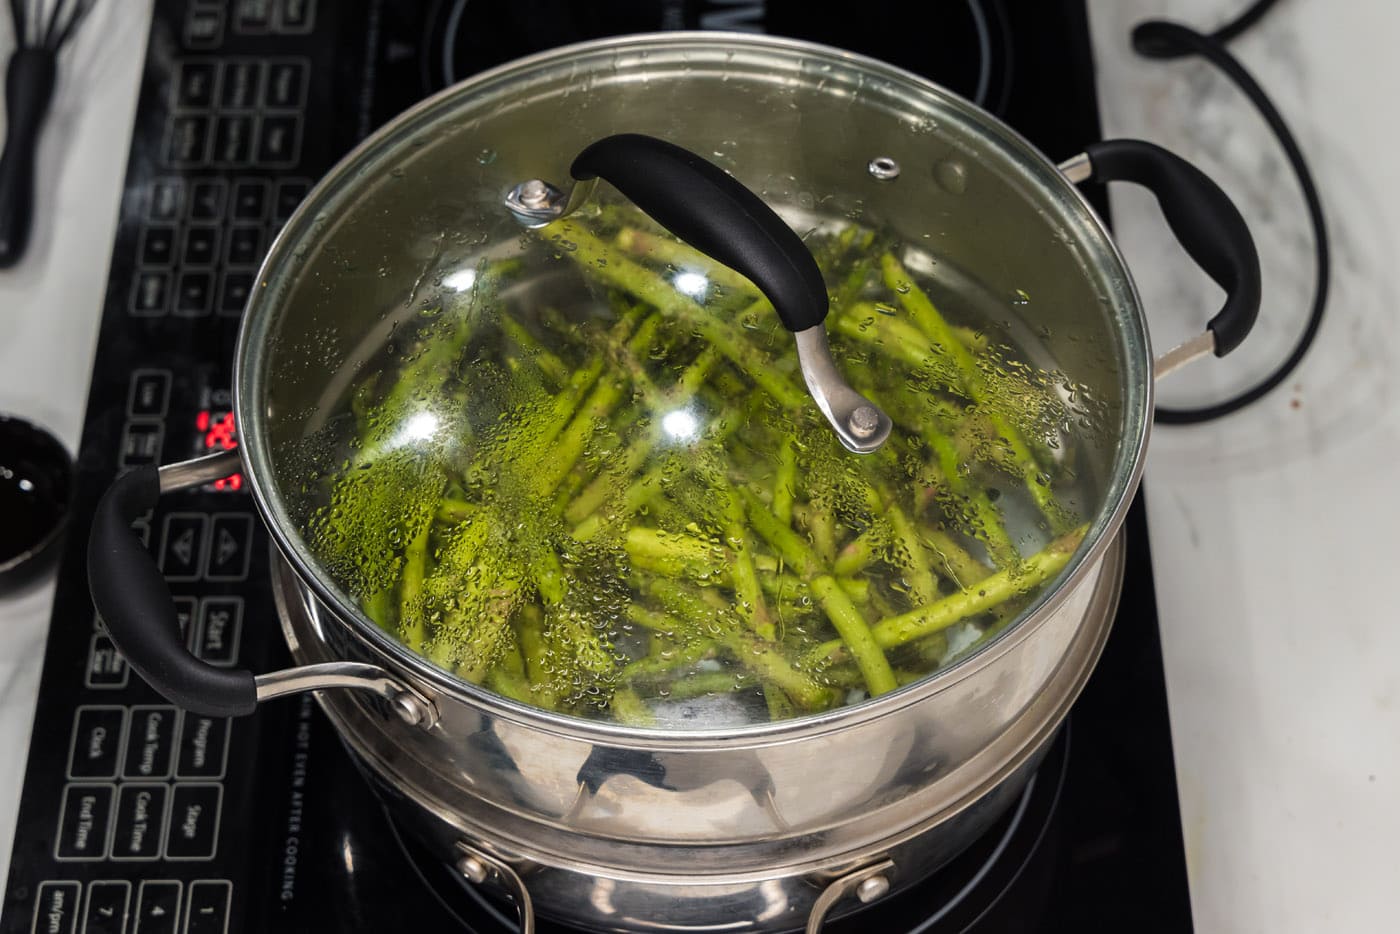 lid covering asparagus spears in a steam pot